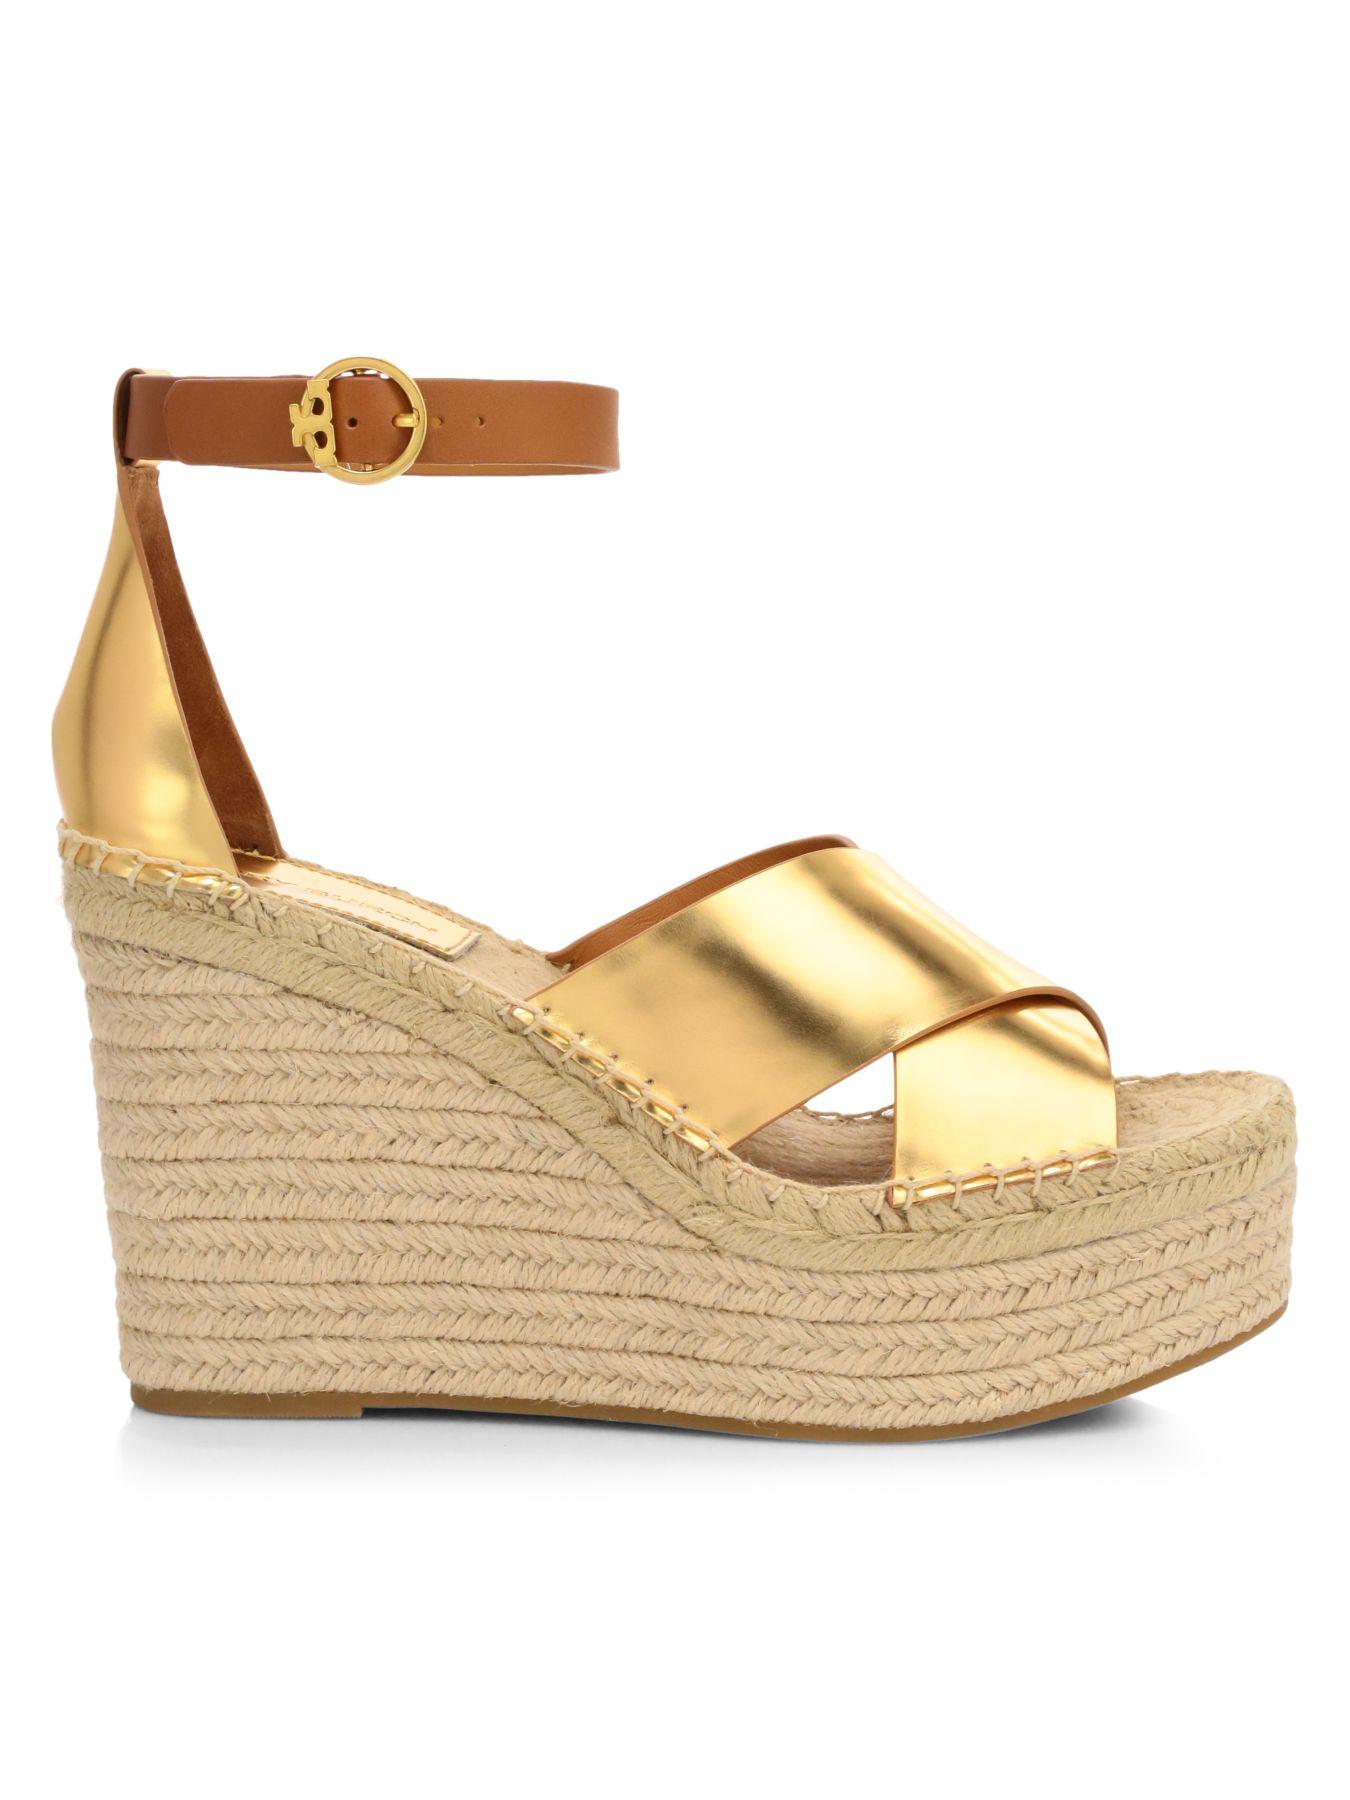 Tory Burch Selby Metallic Leather Platform Espadrille Wedges - Lyst